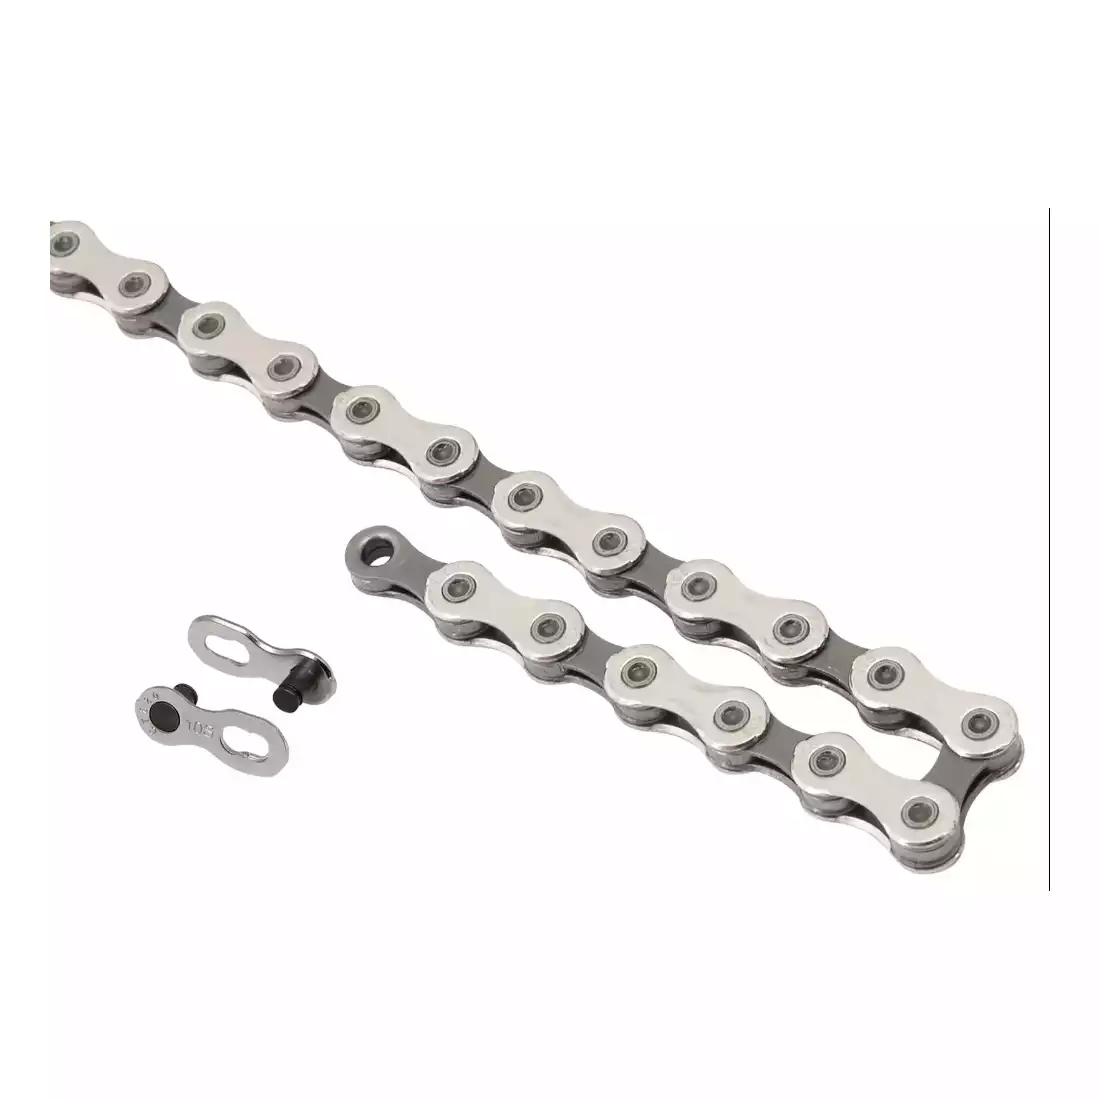 FORCE P1003 10-speed bicycle chain 138 links silver